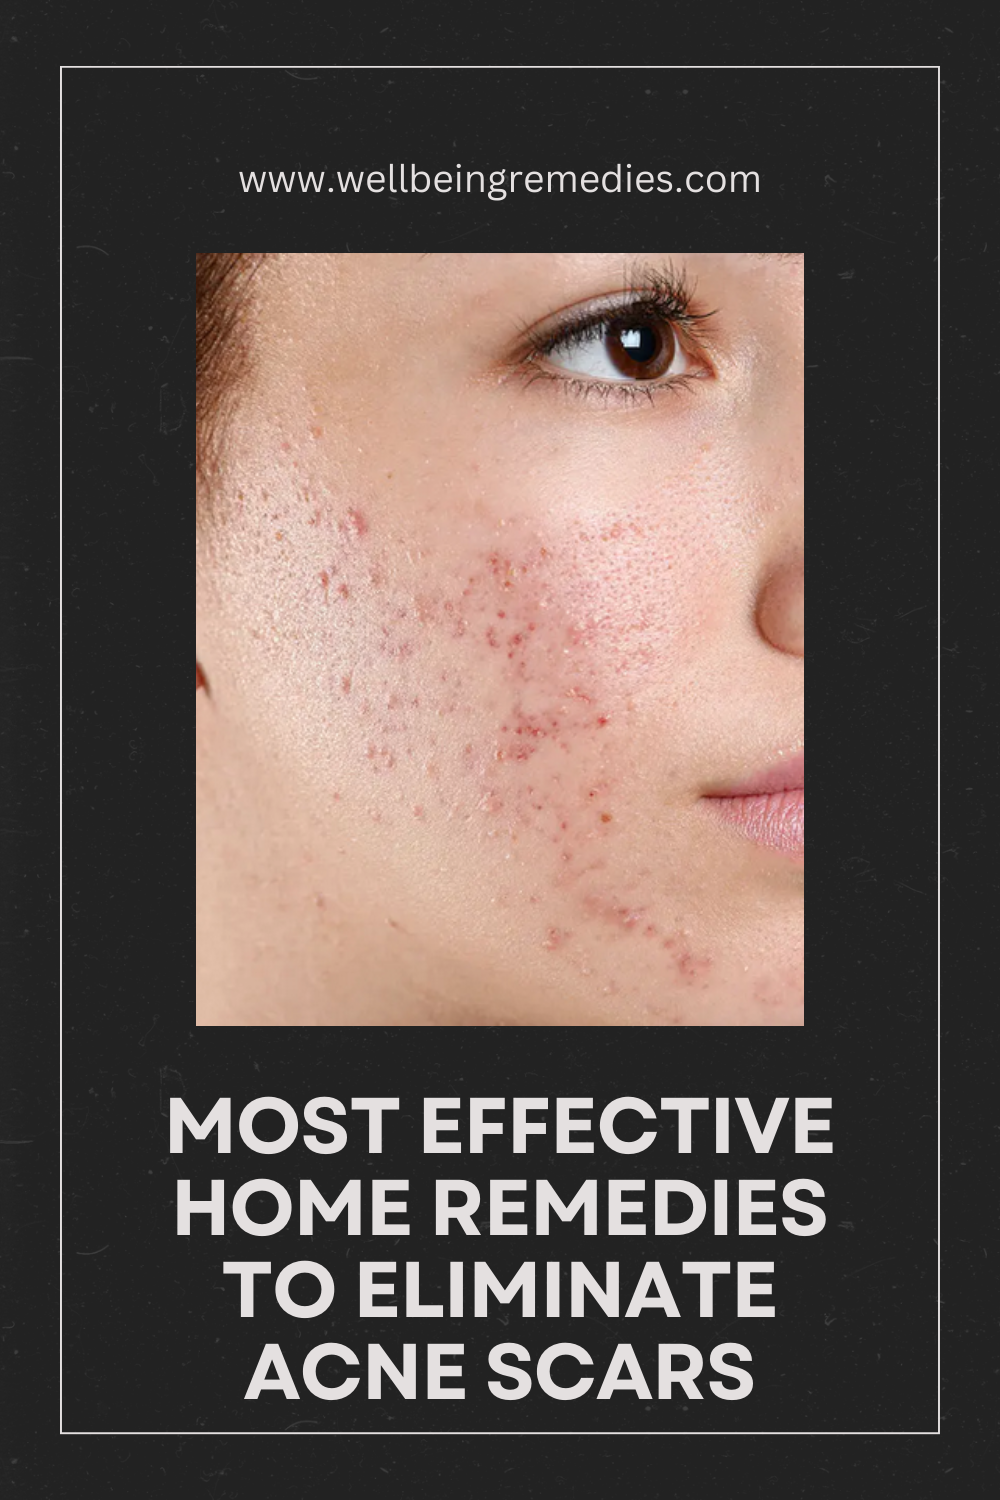 Most Effective Home Remedies to Eliminate Acne Scars